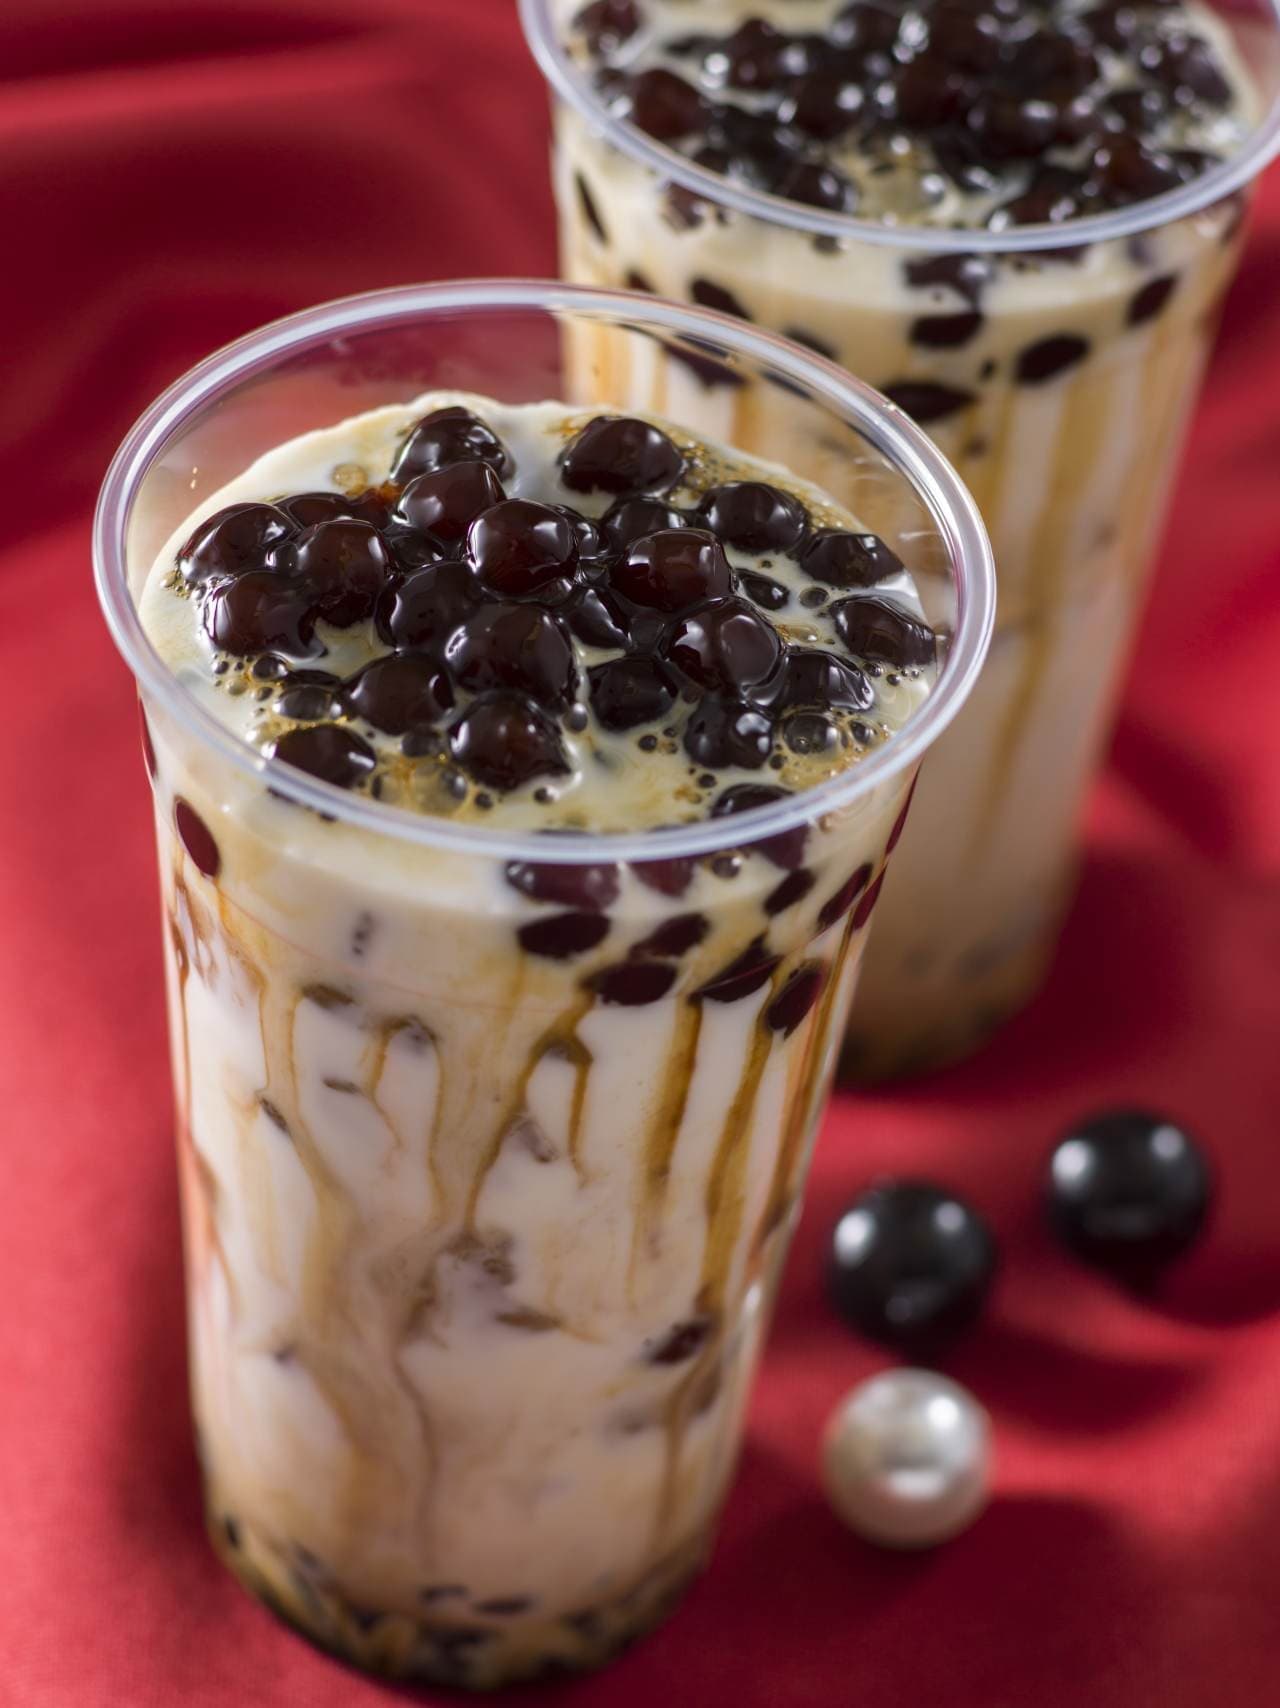 Coffee tapioca with the image of a pirate